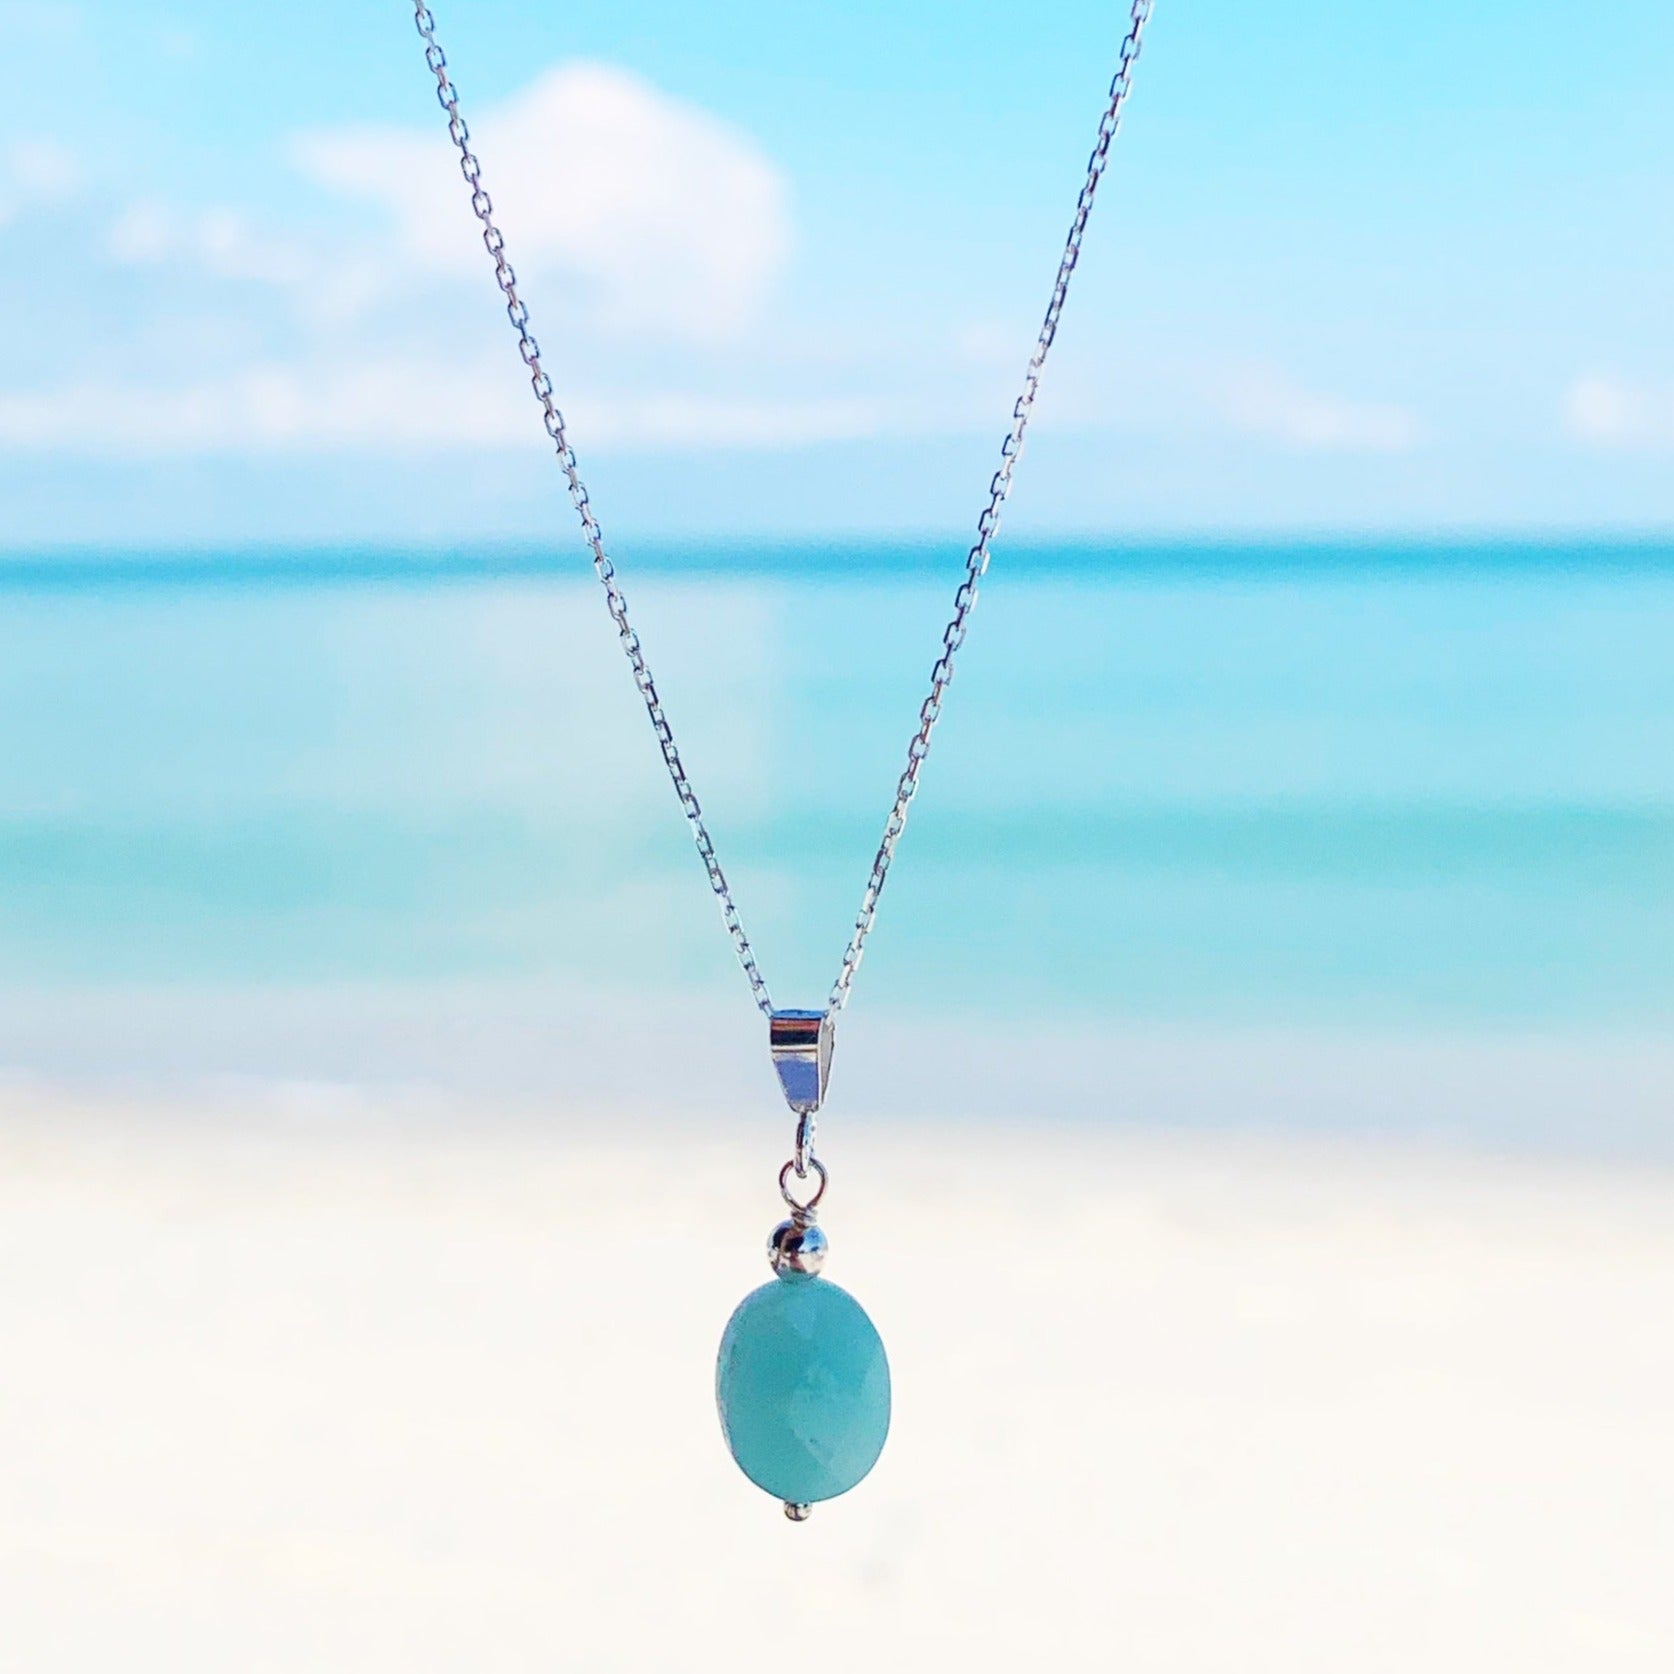 the laguna necklace by mermaids and madeleines is a faceted oval amazonite bead suspended from sterling silver chain and findings. this necklace is photographed closer up with a hazy beach background